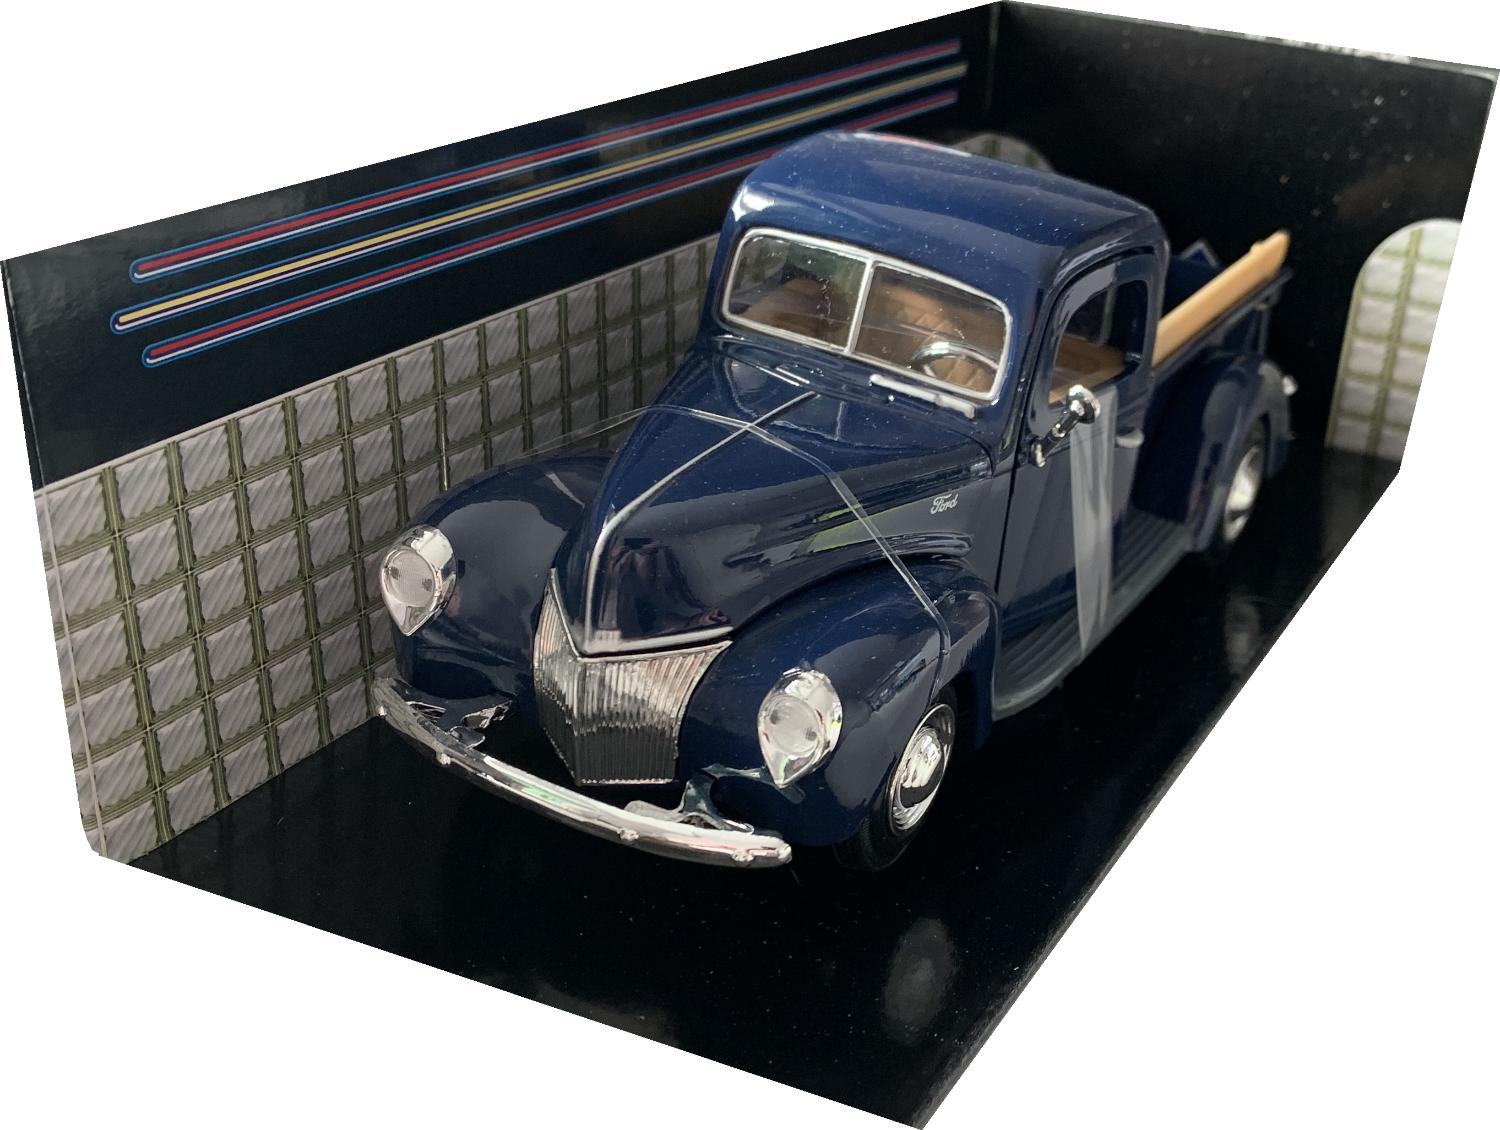 Ford Pickup 1940 in dark blue 1:24 scale model from Motormax